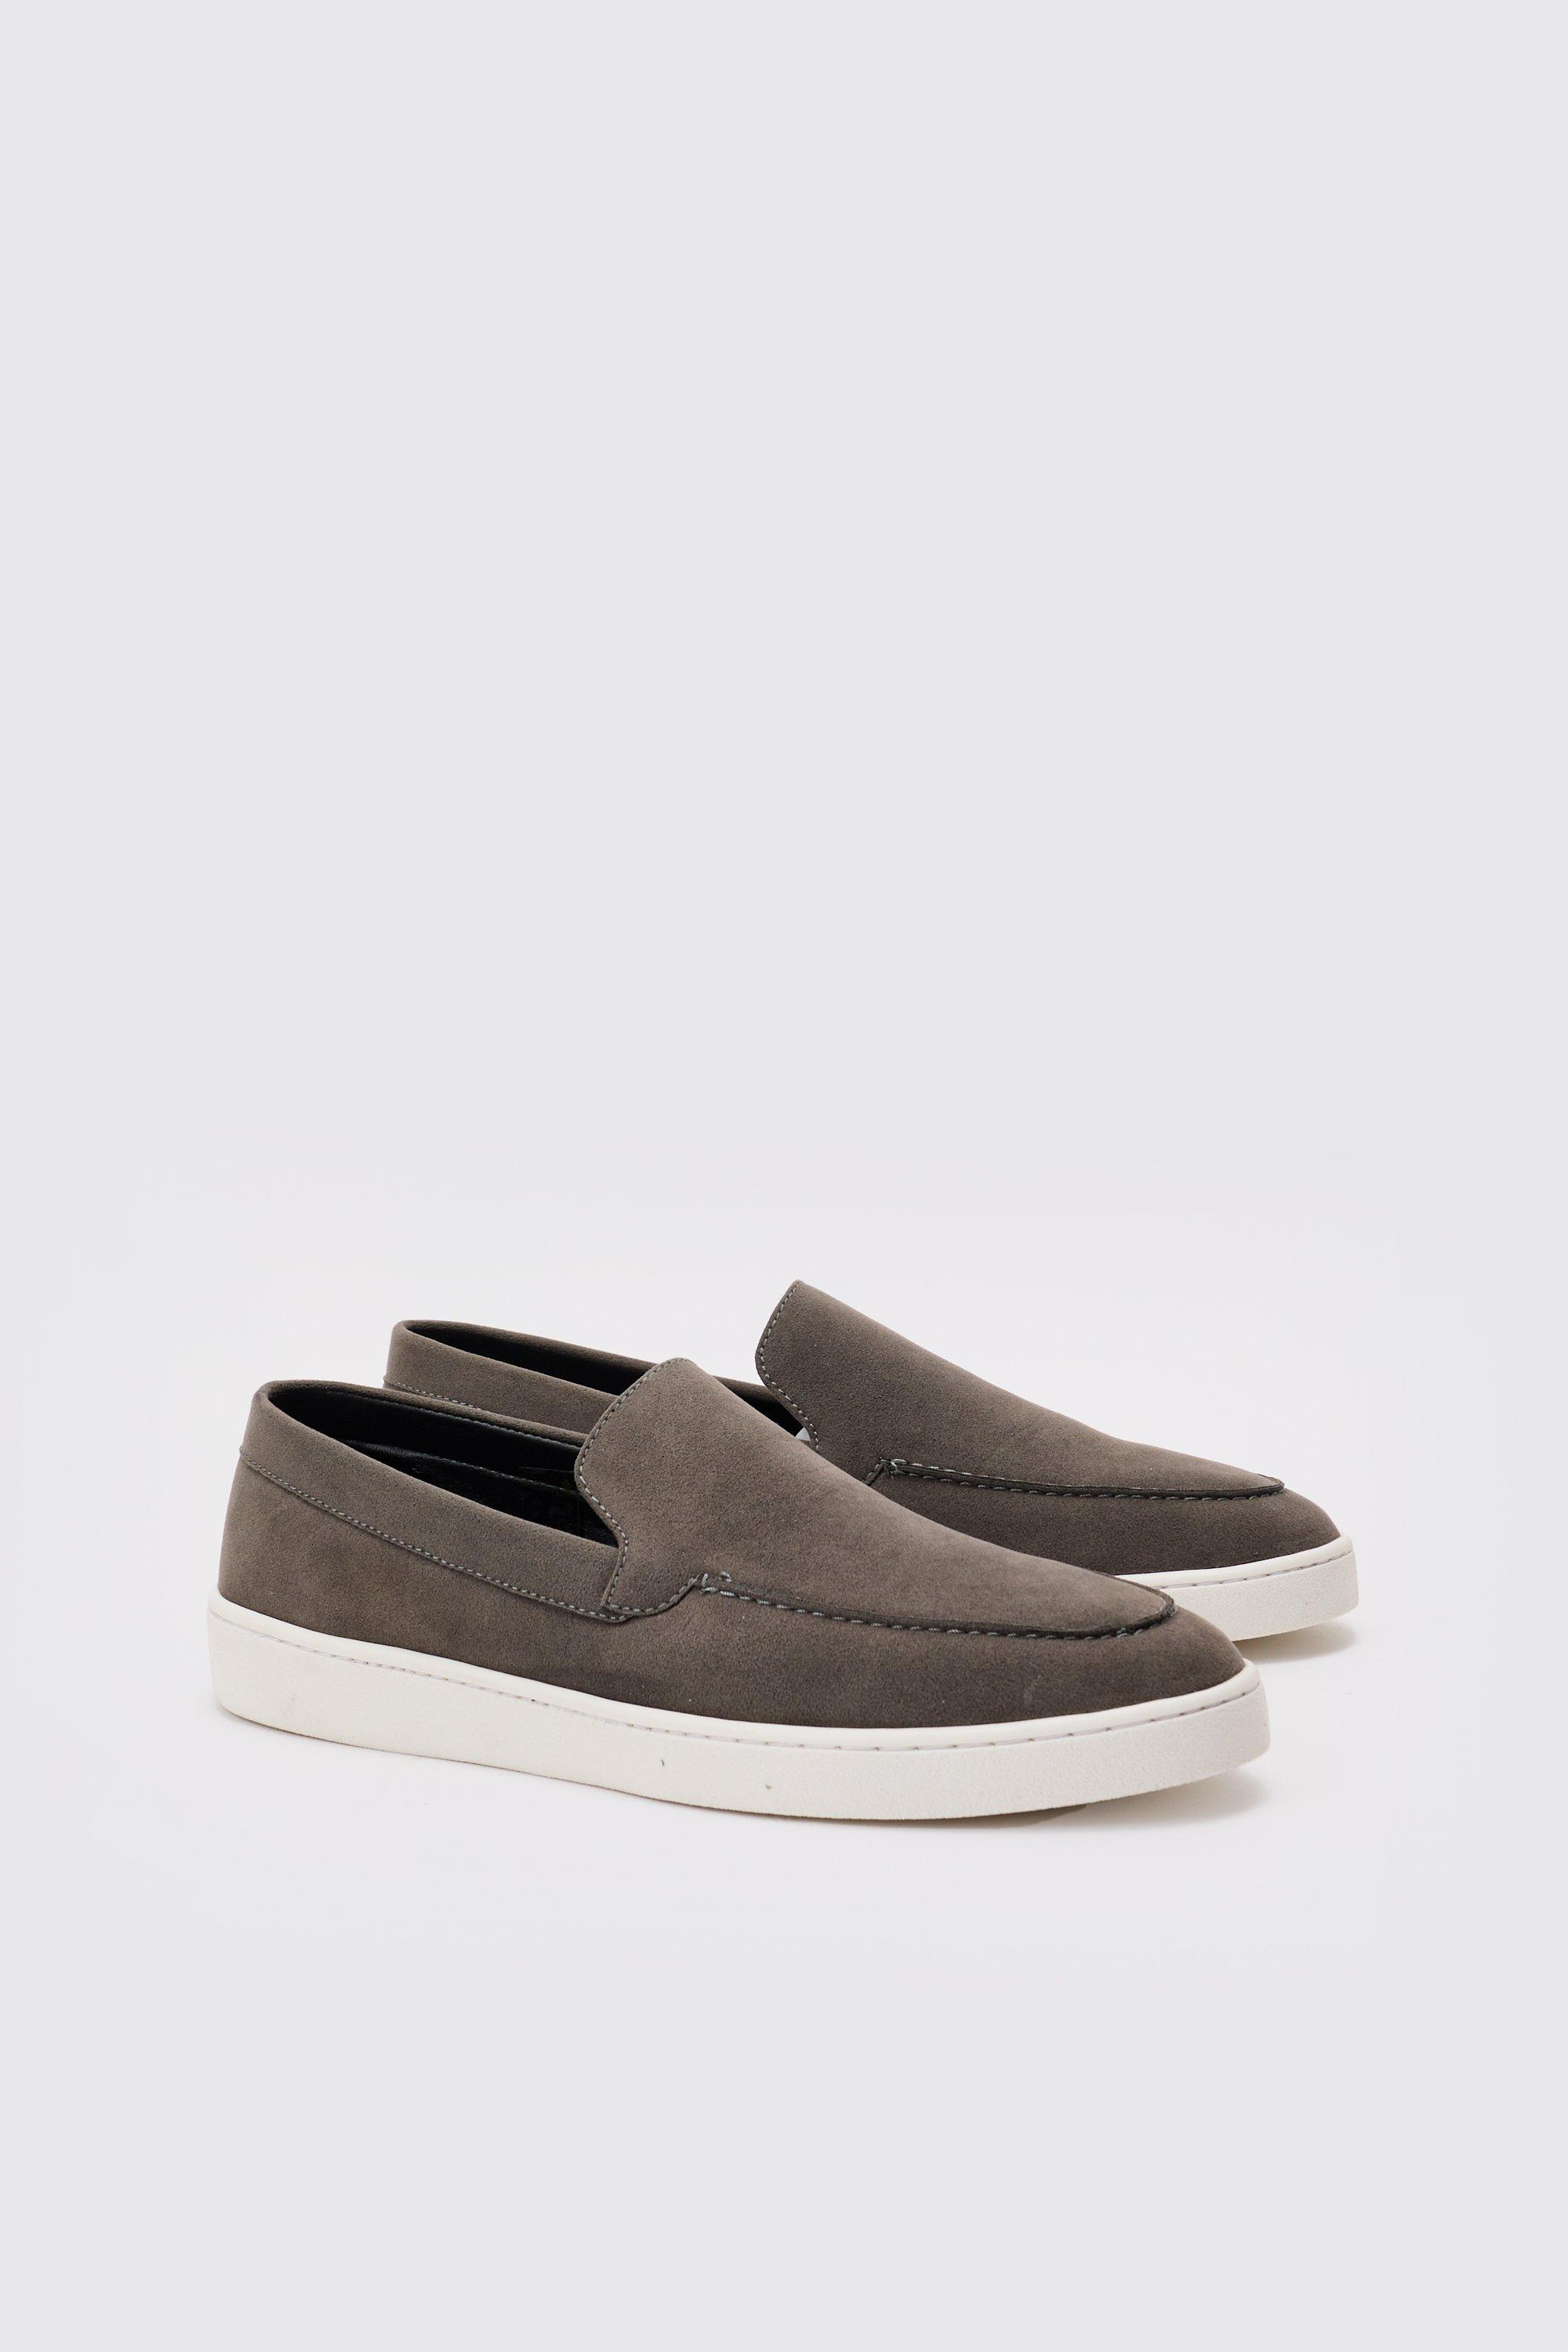 Boohoo Faux Suede Slip On Loafer In Grey, Grey